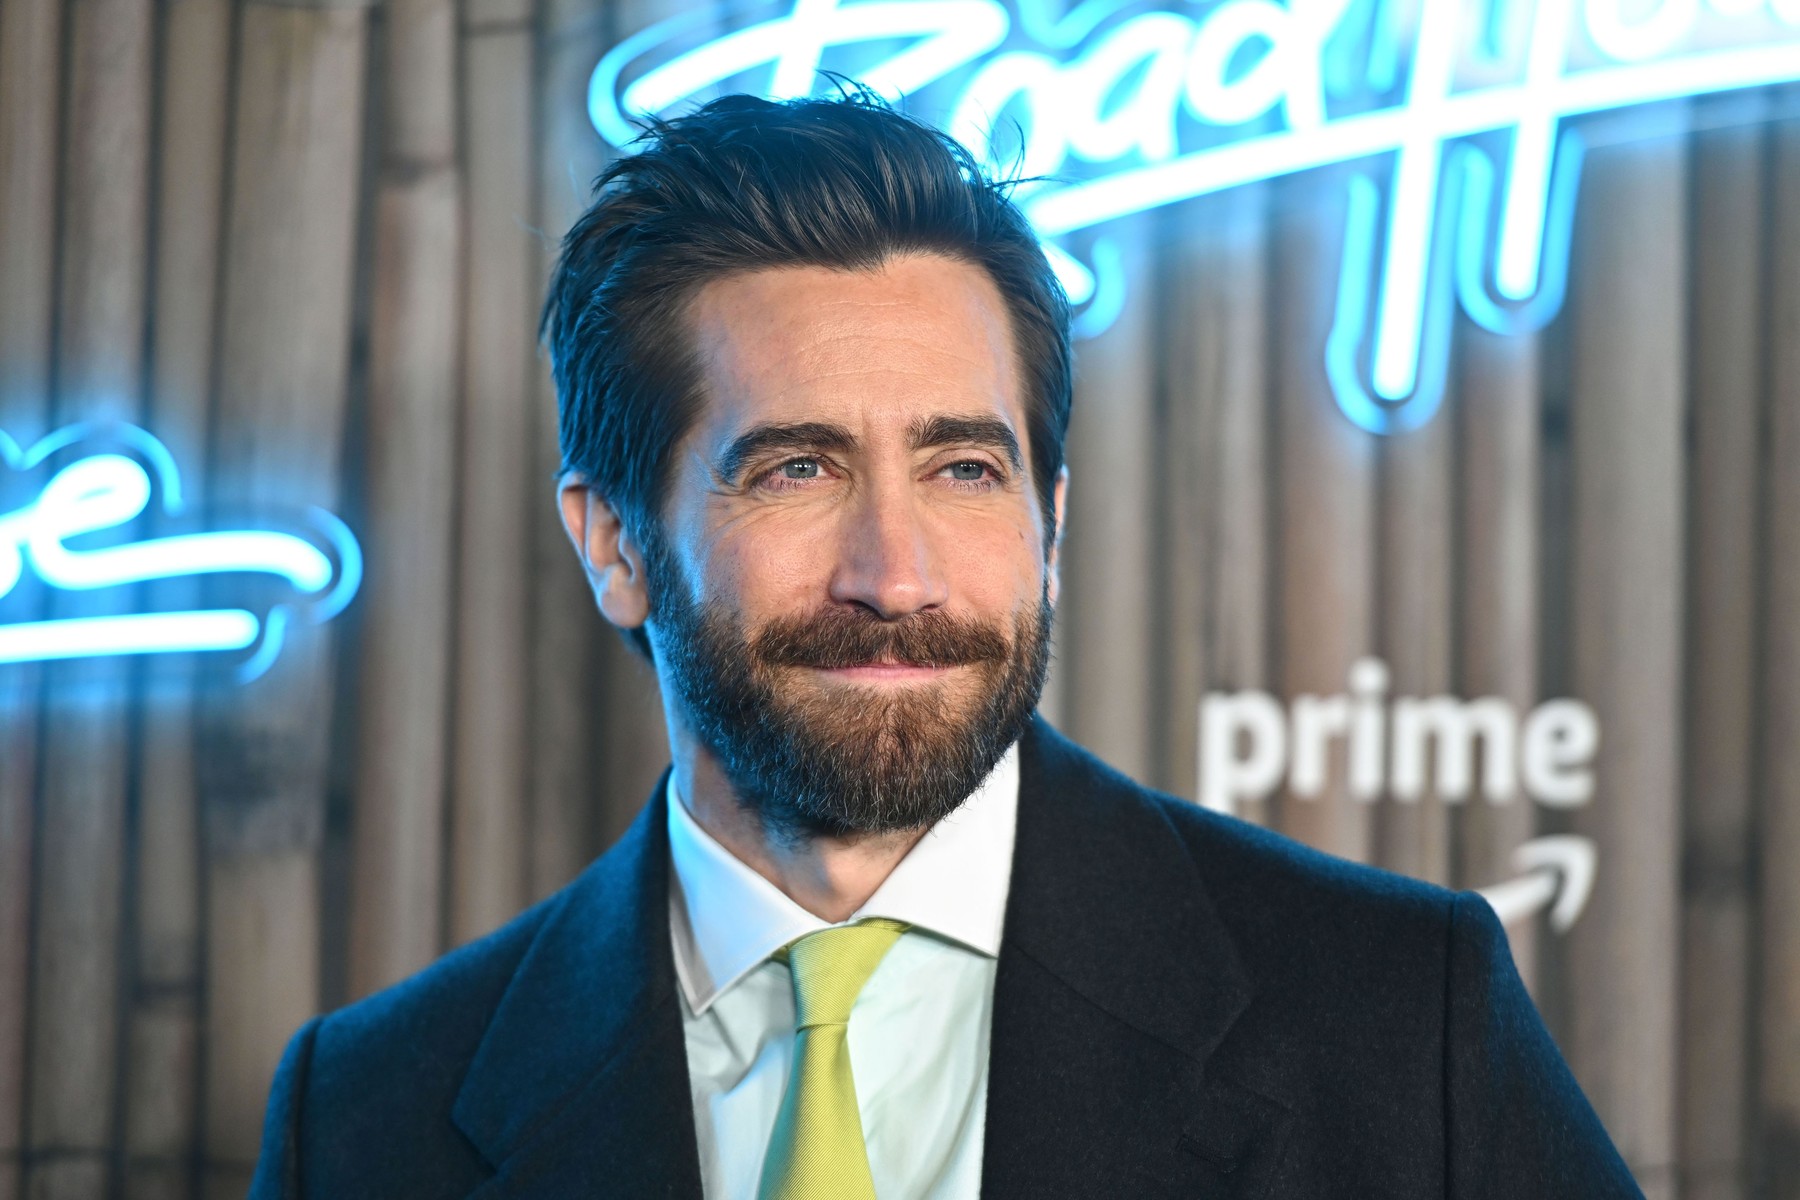 Jake Gyllenhaal at the premiere of "Road House" held on March 19, 2024 at Jazz At Lincoln Center in New York City.
(NYC),Image: 858359911, License: Rights-managed, Restrictions: , Model Release: no, Credit line: zz/NDZ / StarMax / Profimedia